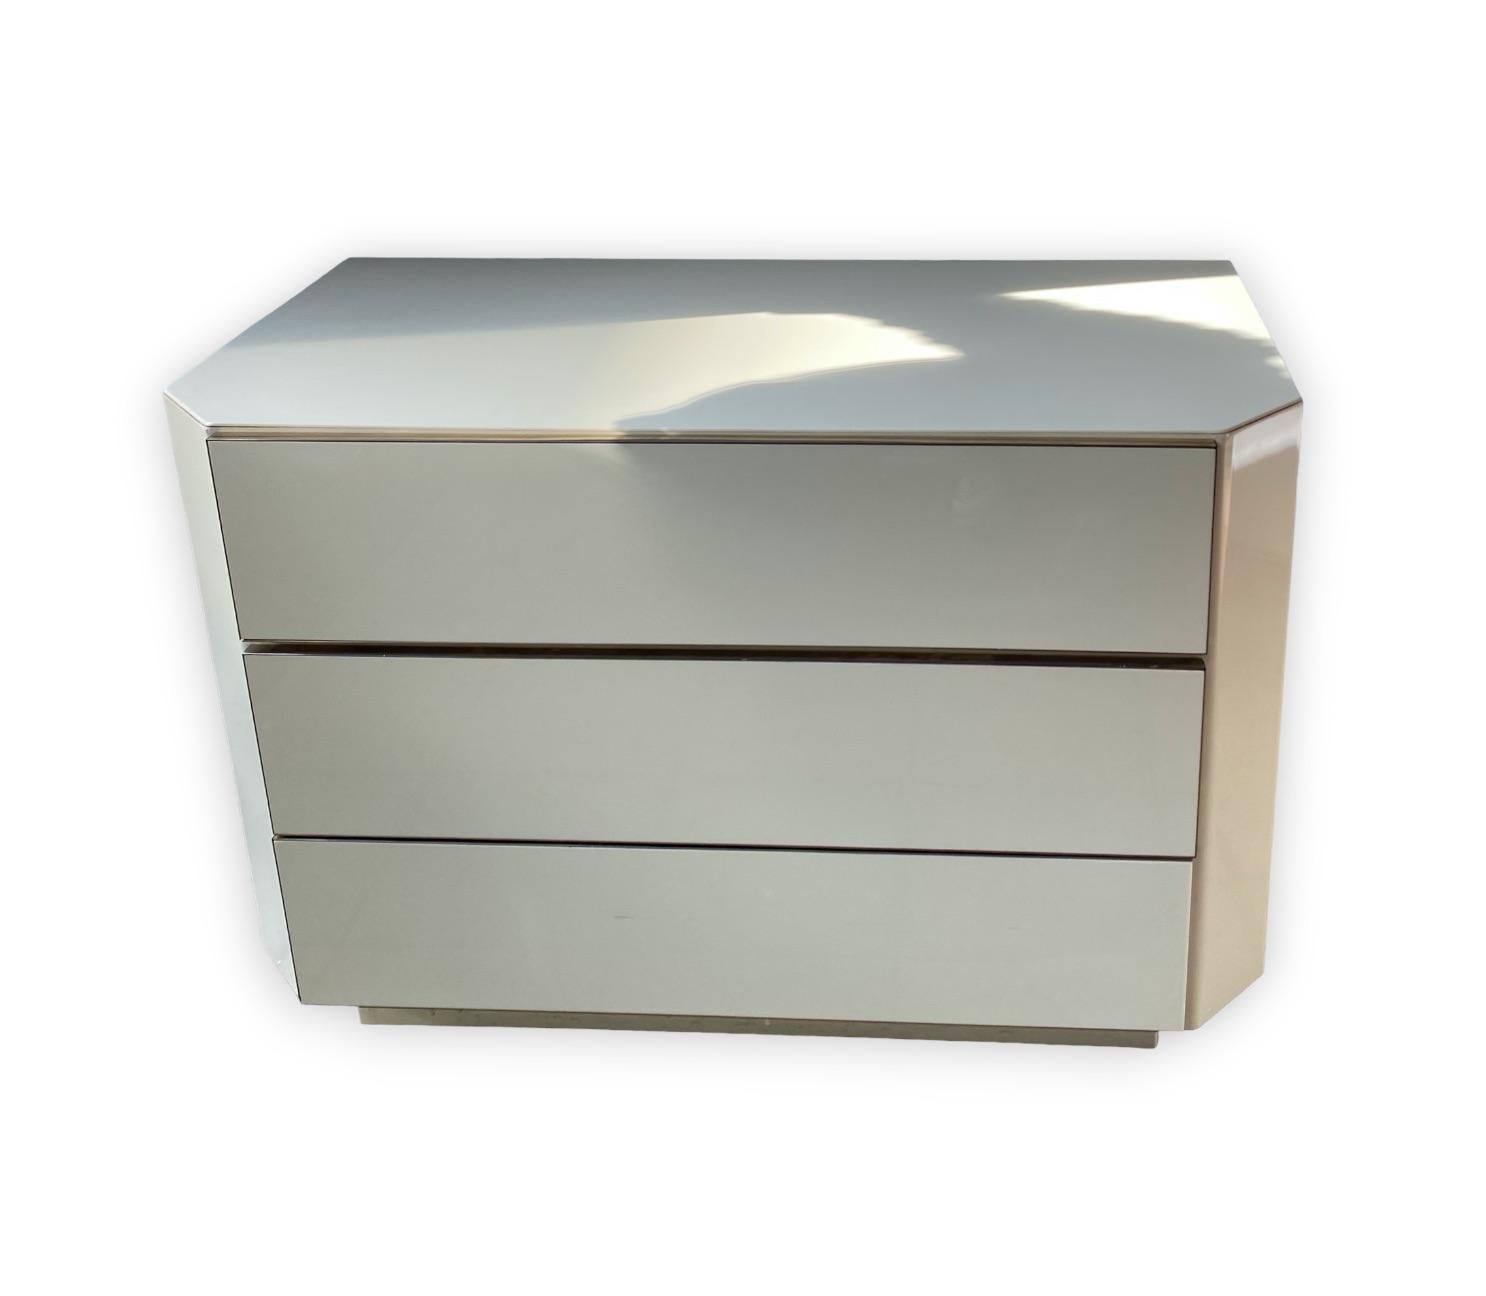 Chest of drawers and mirror set 
Dimensions : 
Chest of drawers: L 100 x D 51 x H 70 cm
Mirror : h 71 x w 70 x d 4 cm
small chest of drawers : 61 x 42 x h 45 cm
lacquered chest of drawers and mirror 
1980
